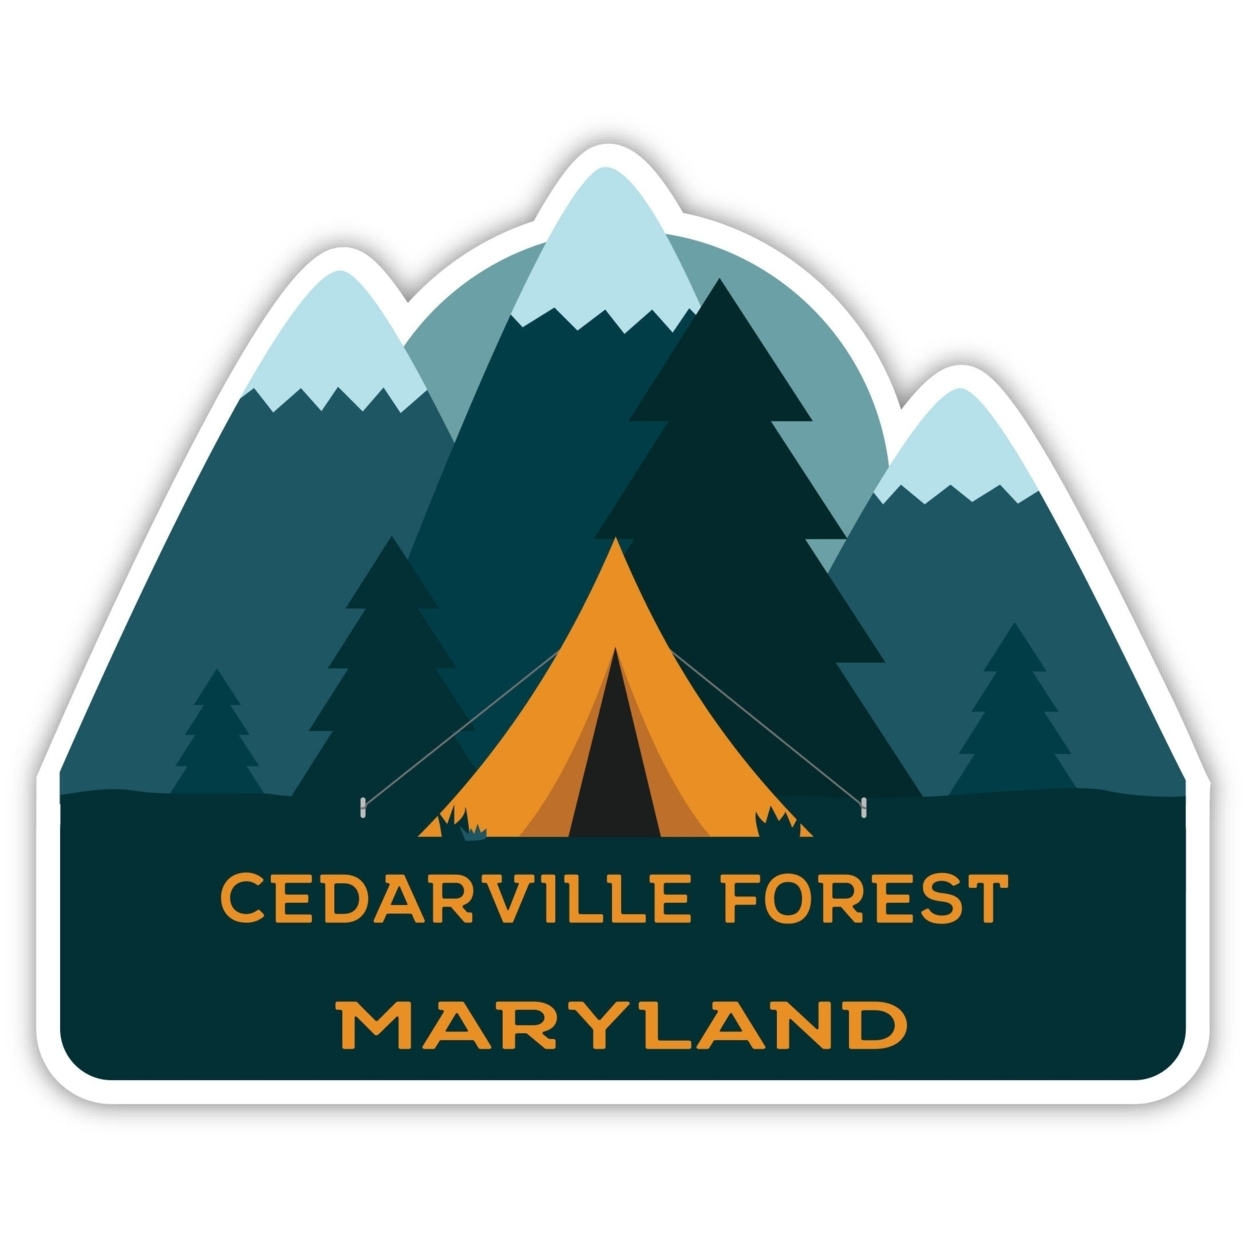 Cedarville Forest Maryland Souvenir Decorative Stickers (Choose Theme And Size) - Single Unit, 8-Inch, Tent